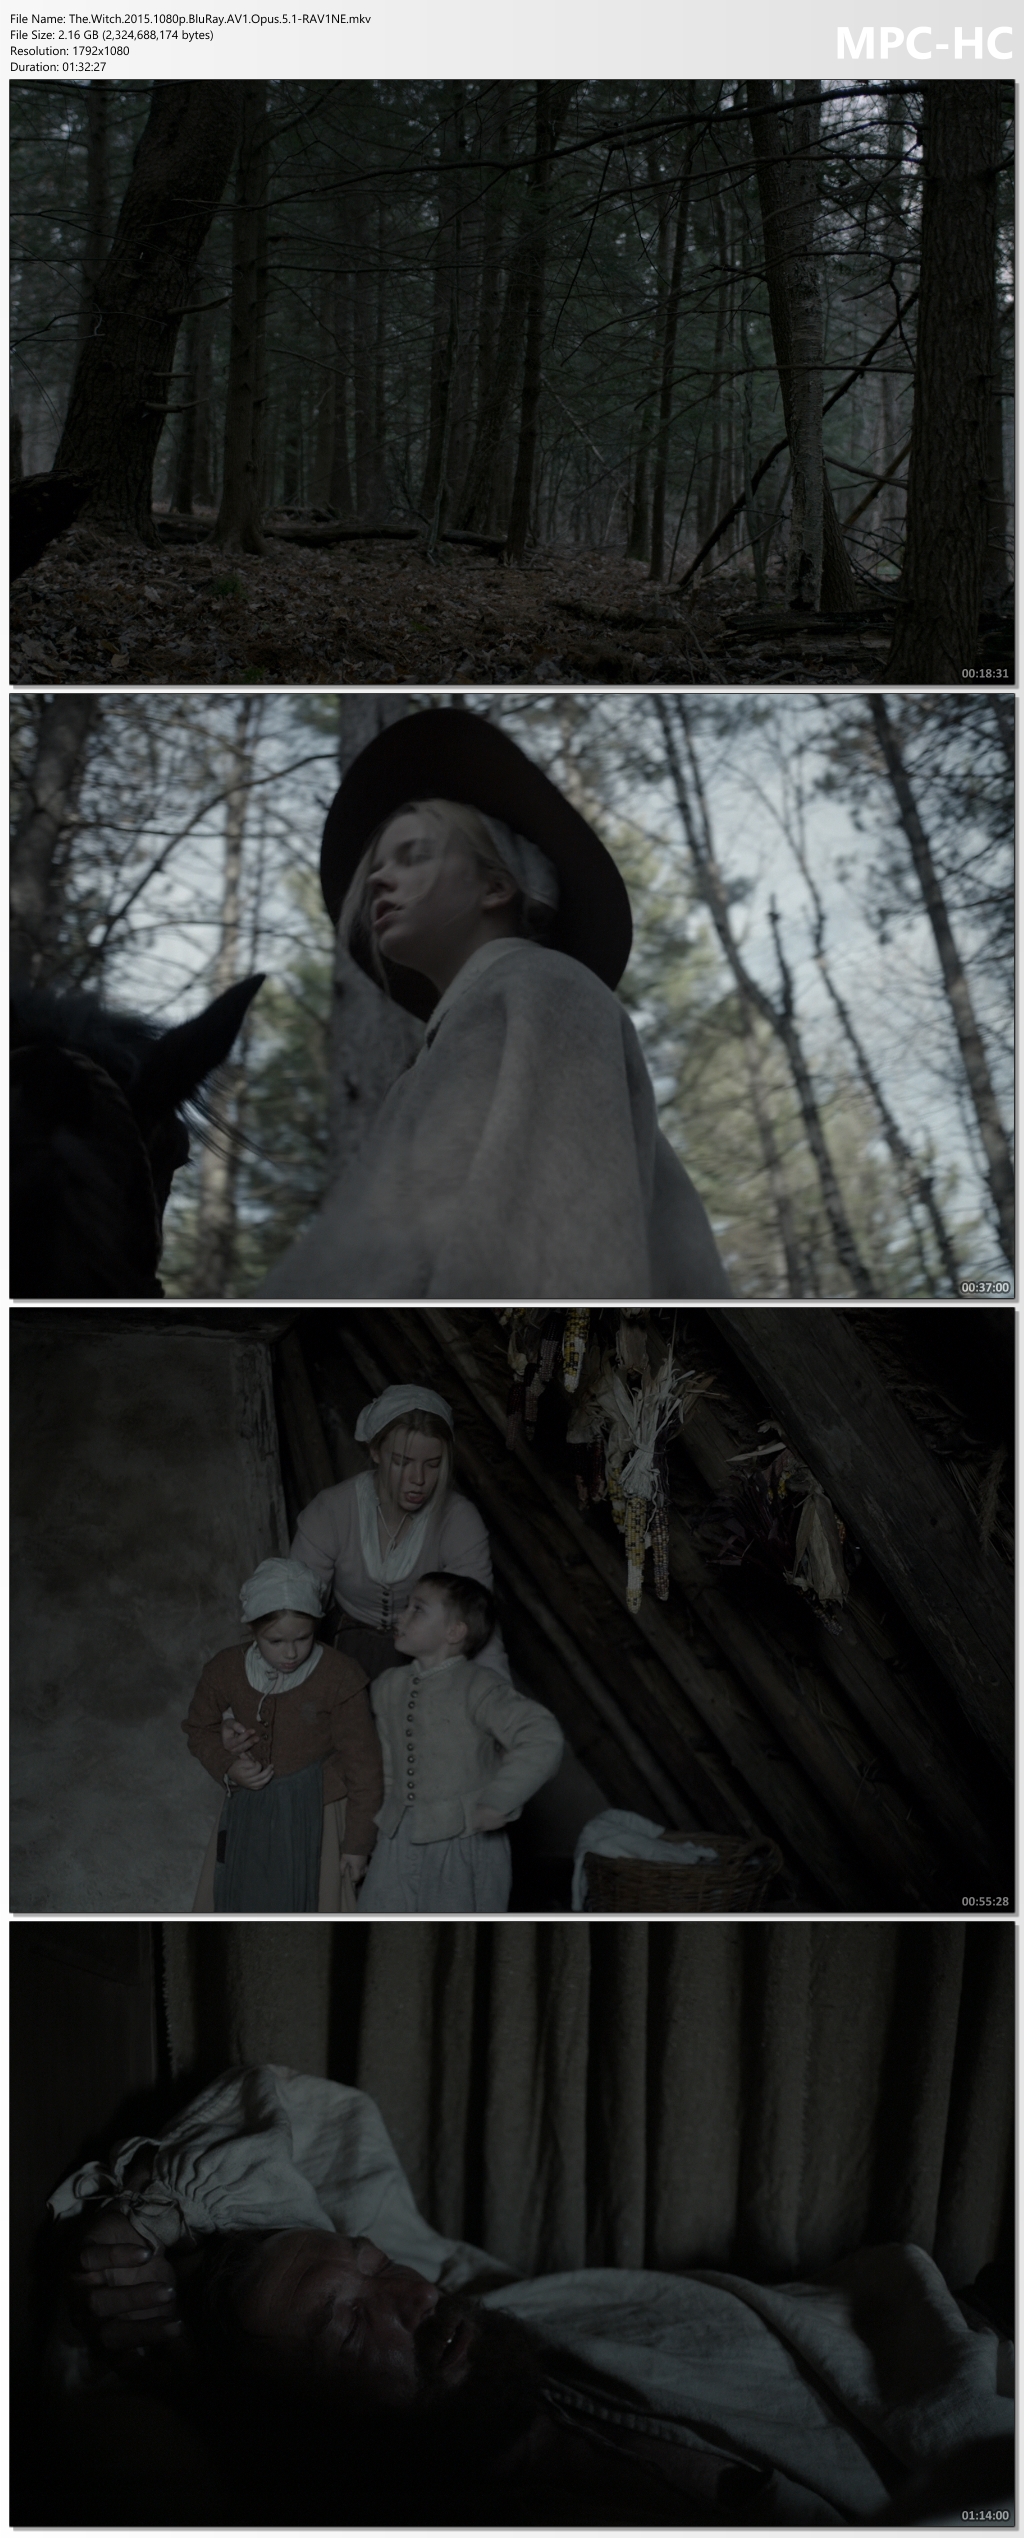 [Image: the.witch.2015.1080p.sgiwe.jpg]